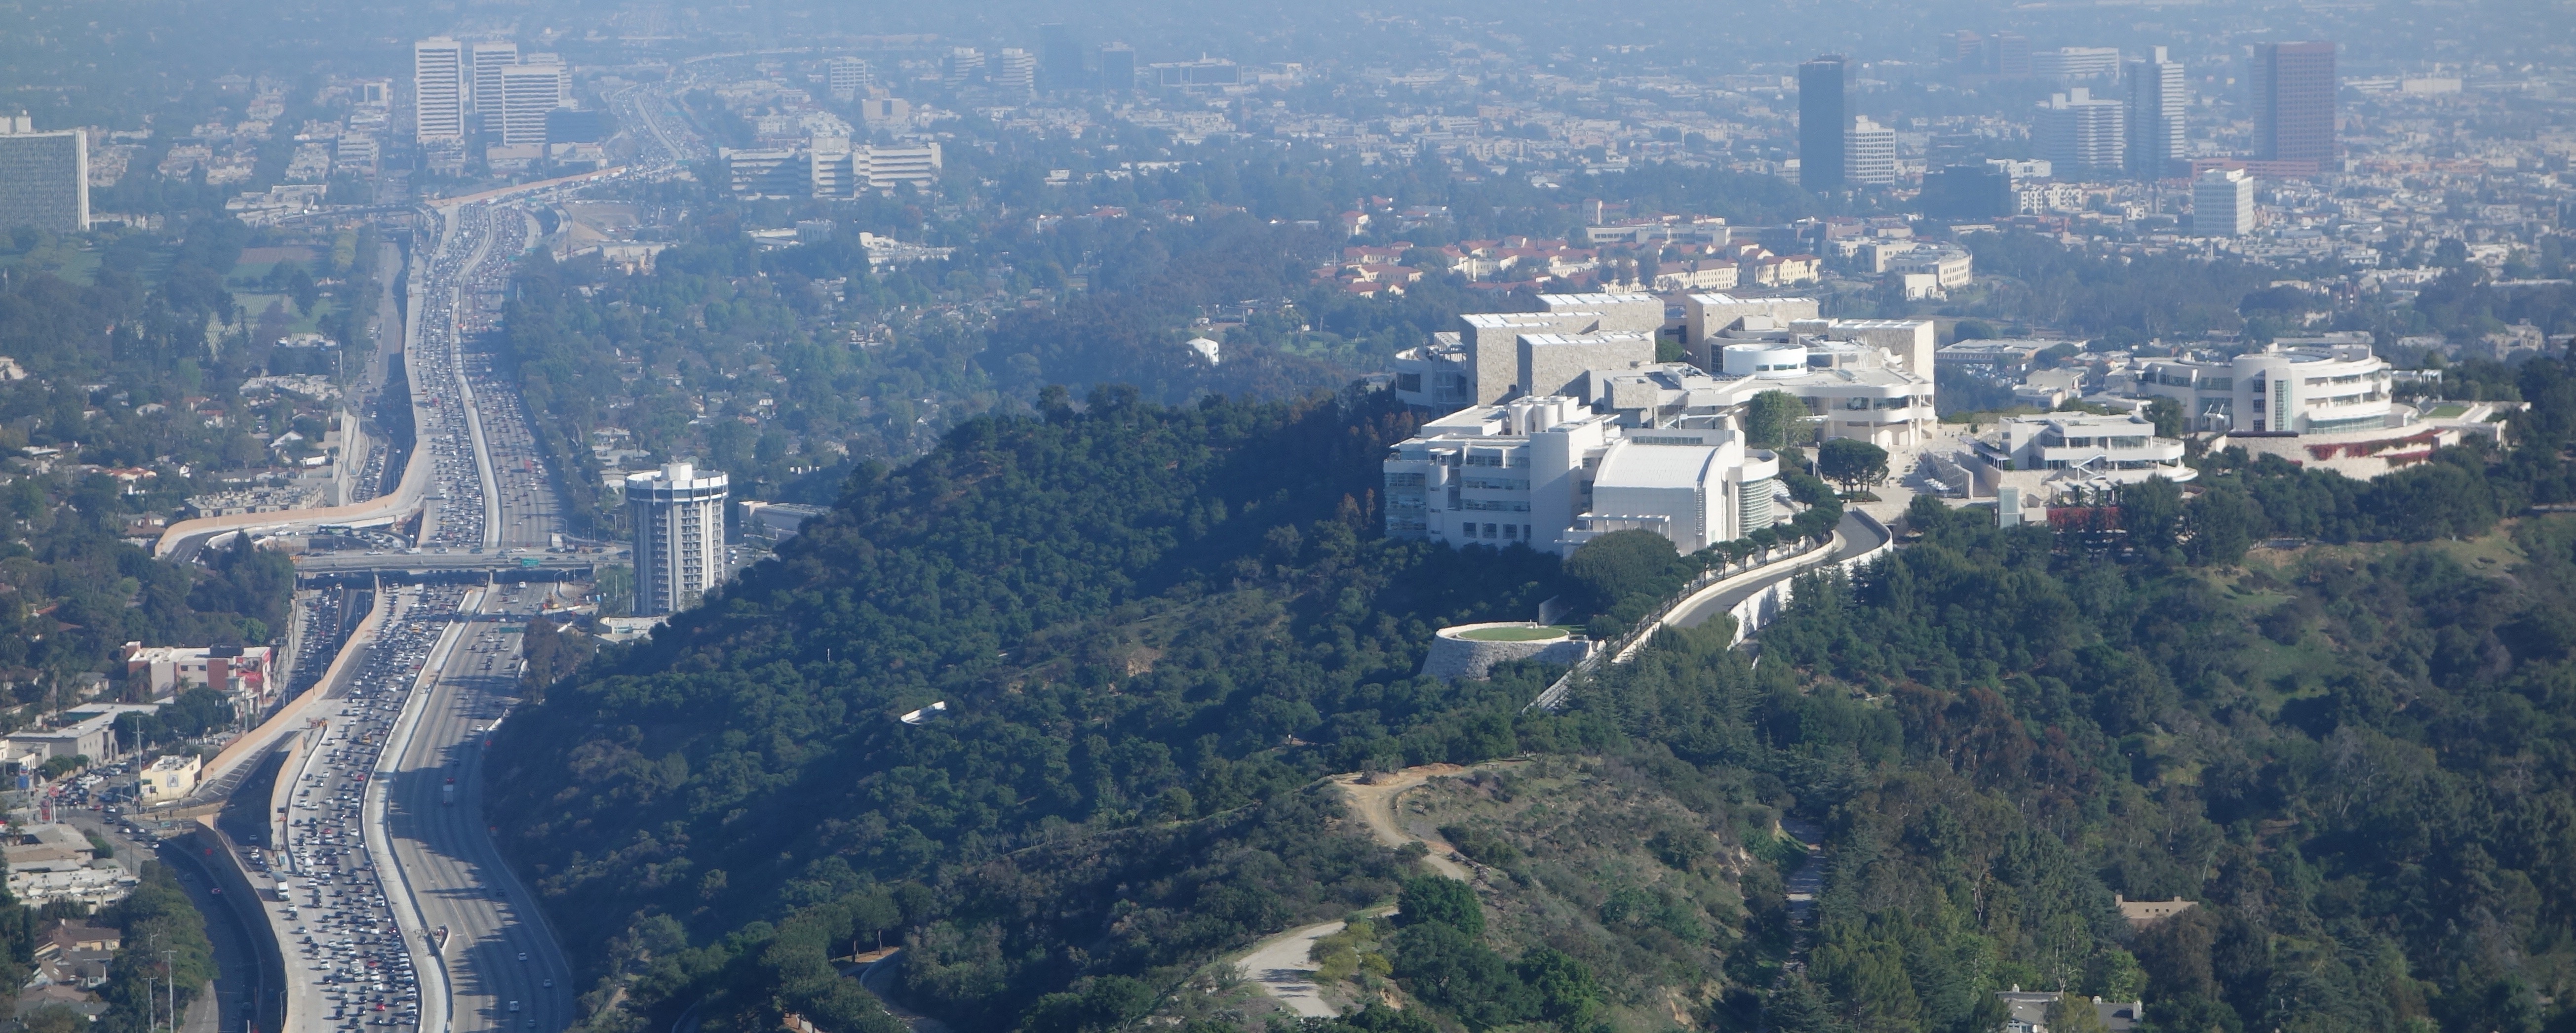 The Getty Museum, as seen from a spot that involves a seriously vertical hike.